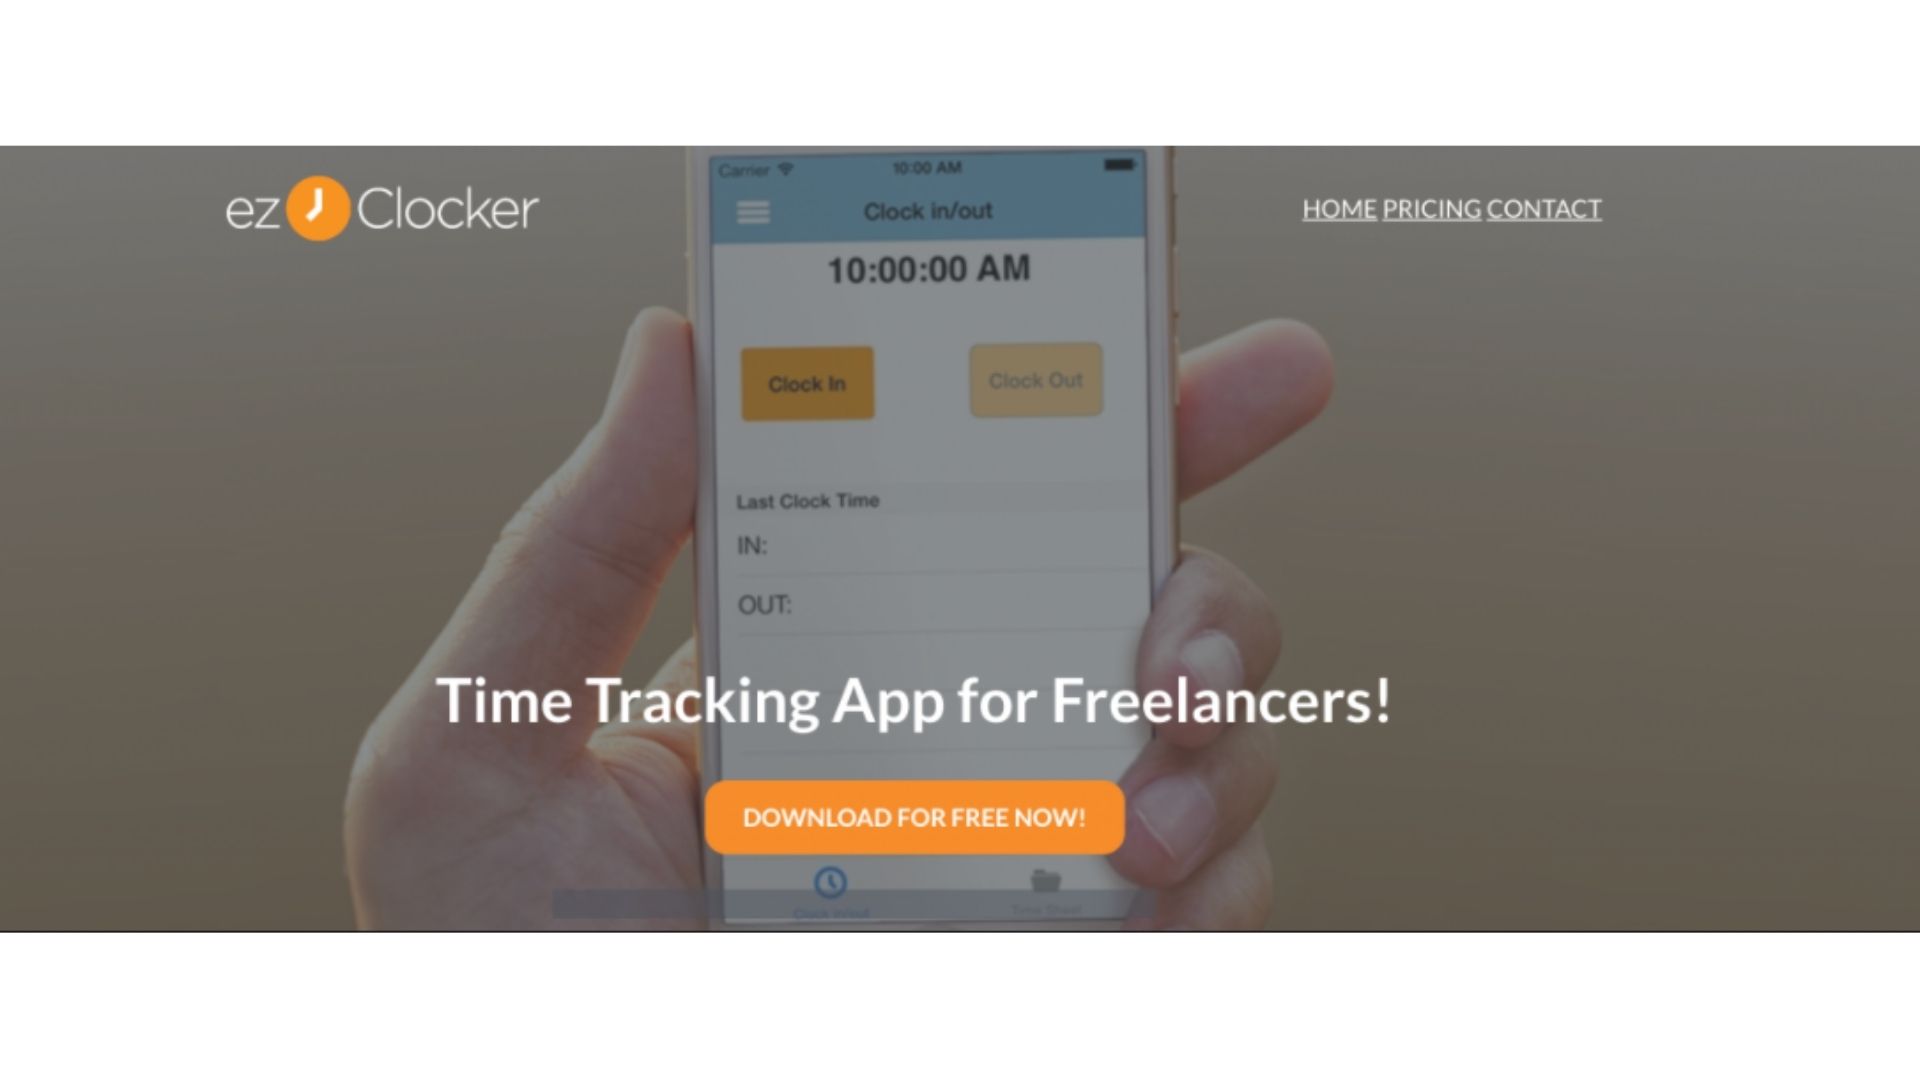 Get feedback from a vast remote working audience about ezClocker